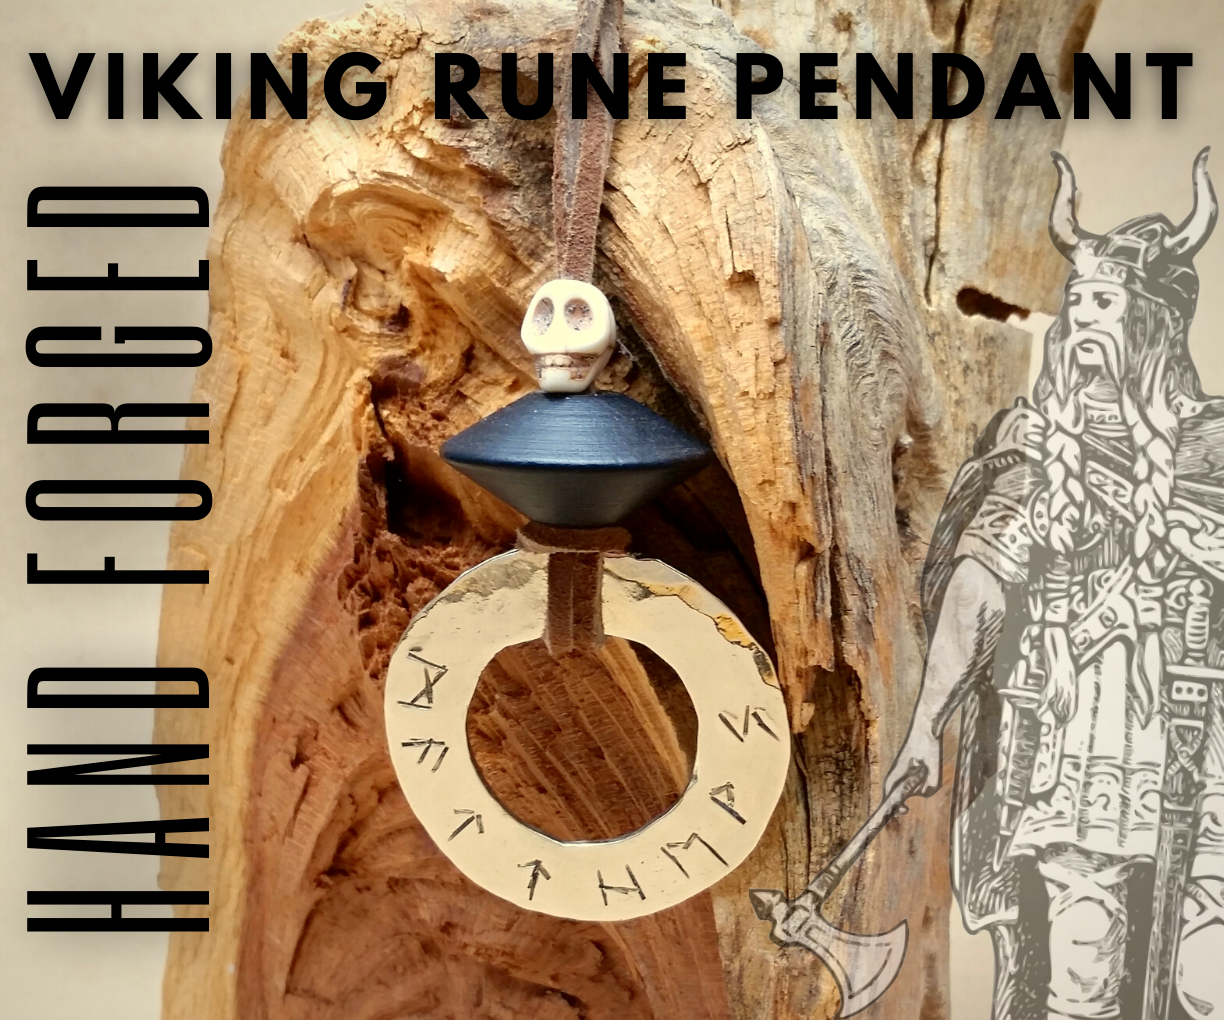 Forge Your Own Viking Rune Pendant!